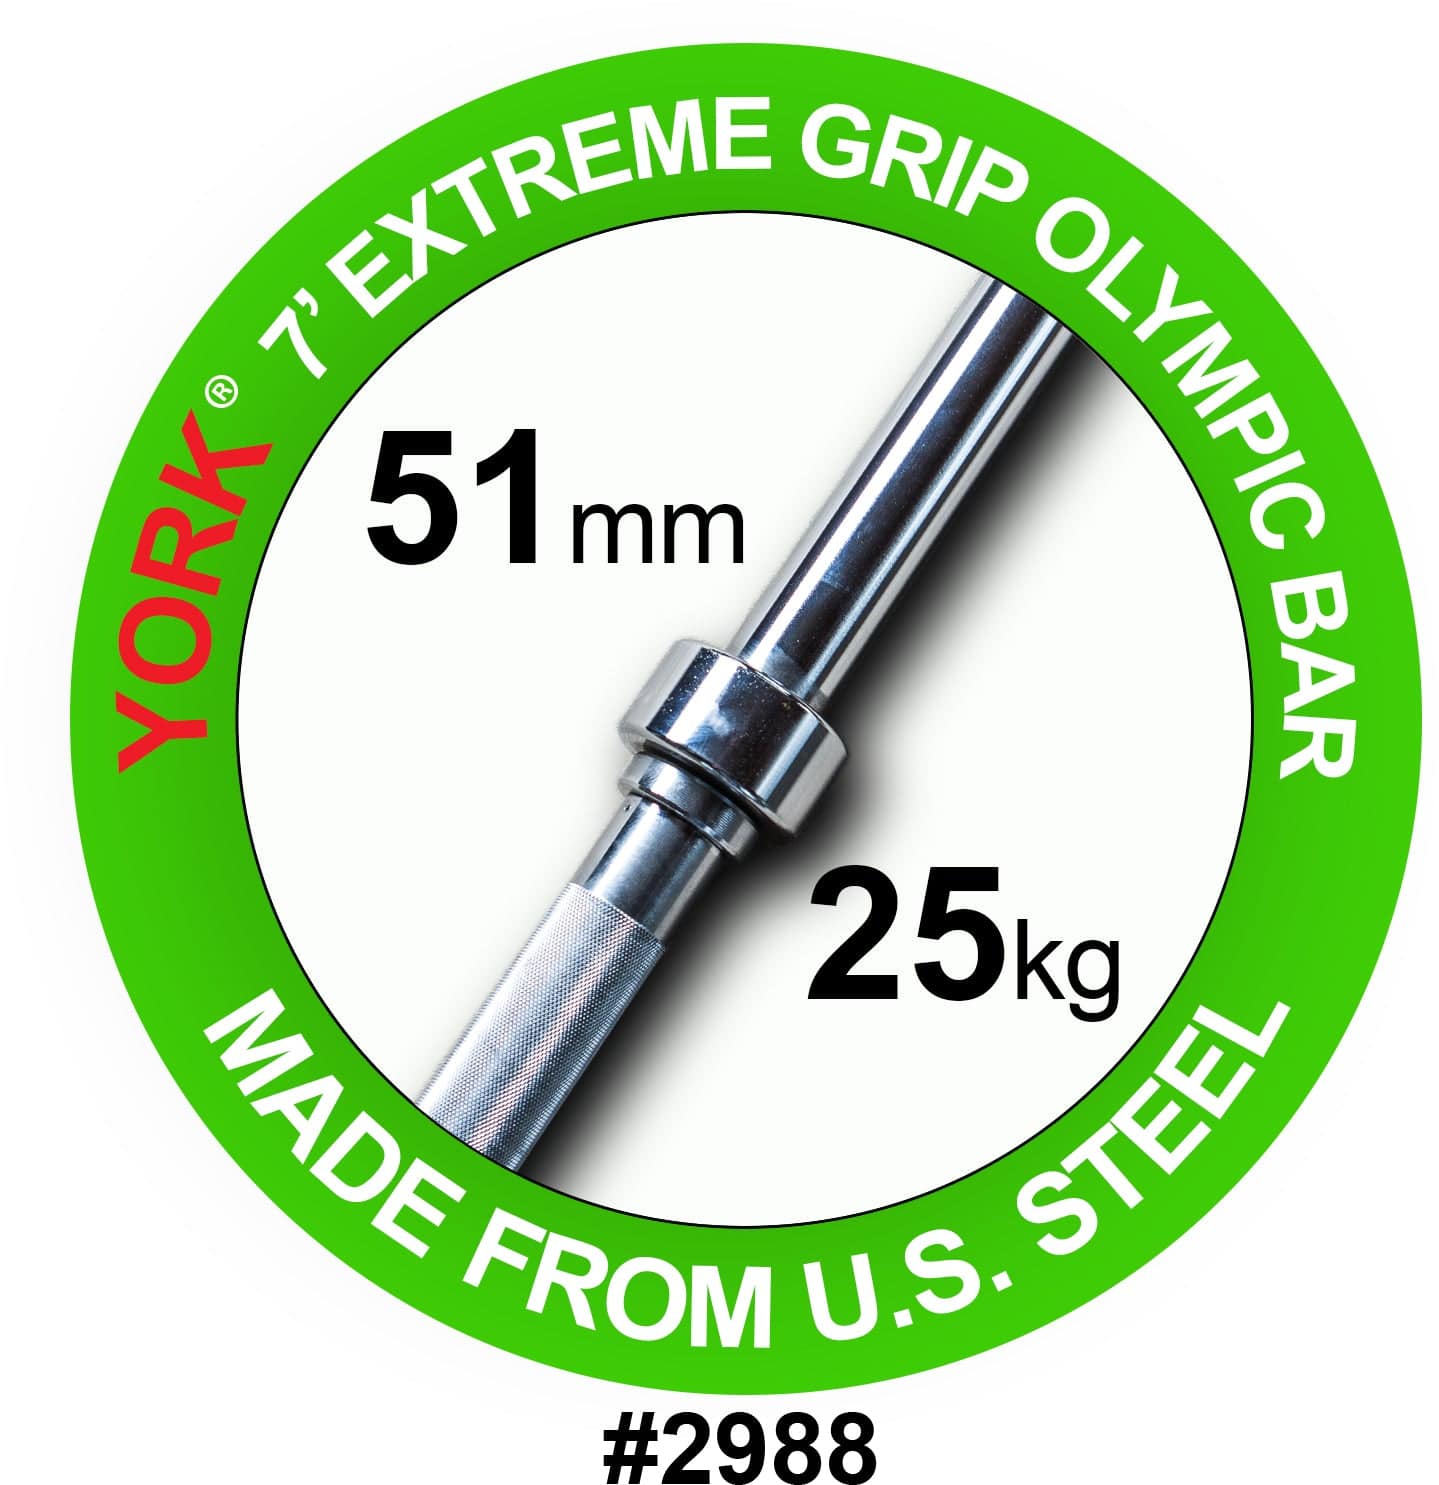 York Barbell | "Extreme" Hercules Fat Grip Bar - 7ft - XTC Fitness - Exercise Equipment Superstore - Canada - Multi-Purpose Barbell